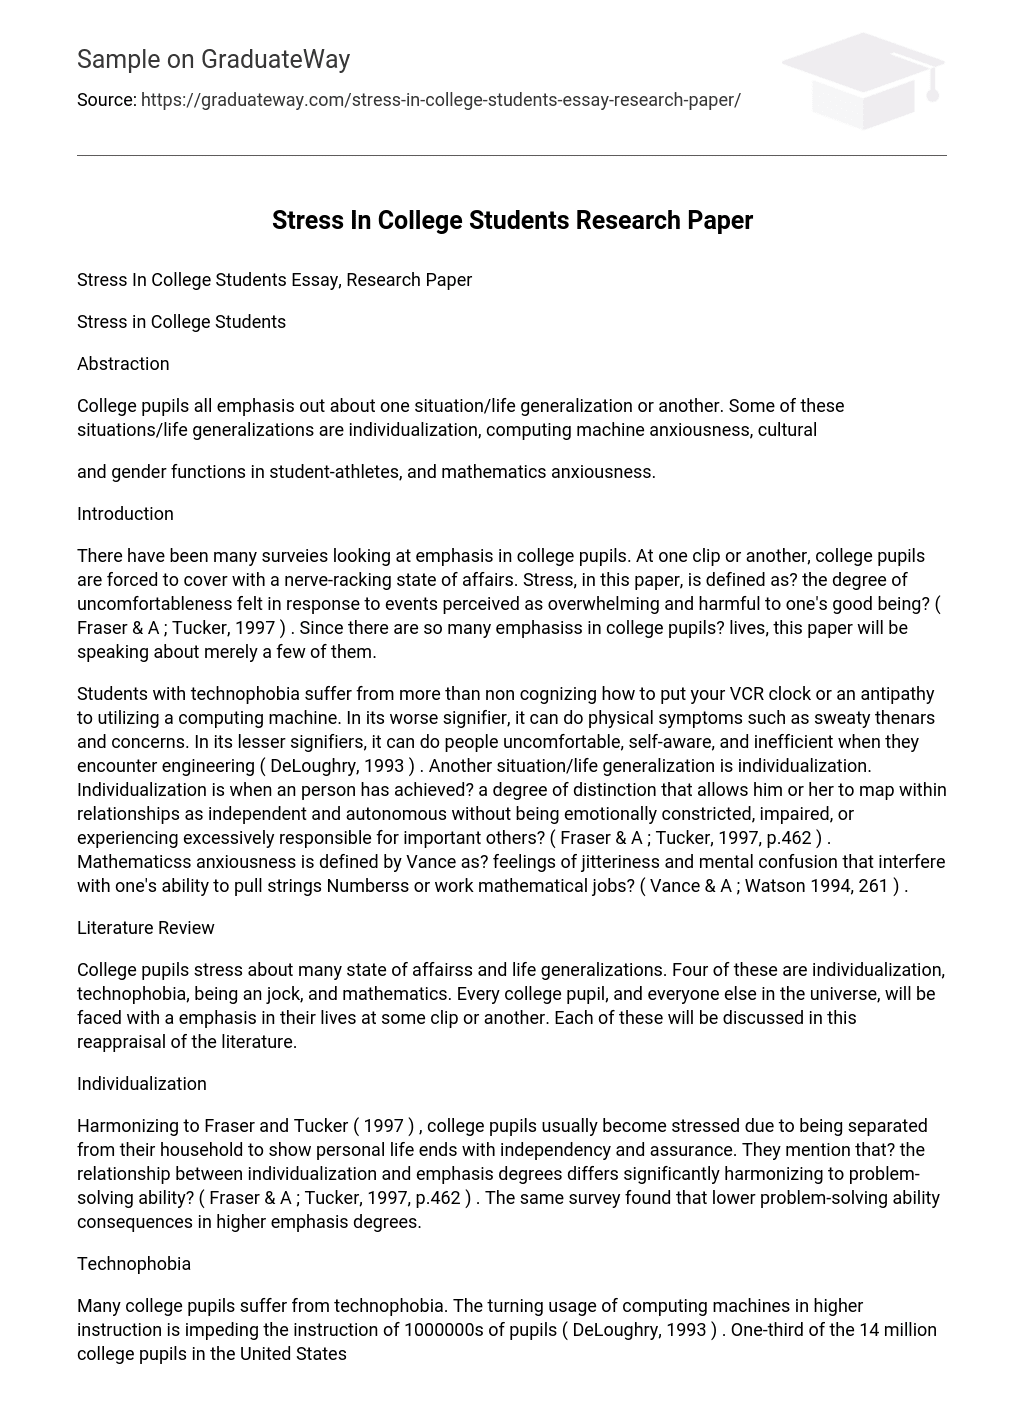 stress for research paper